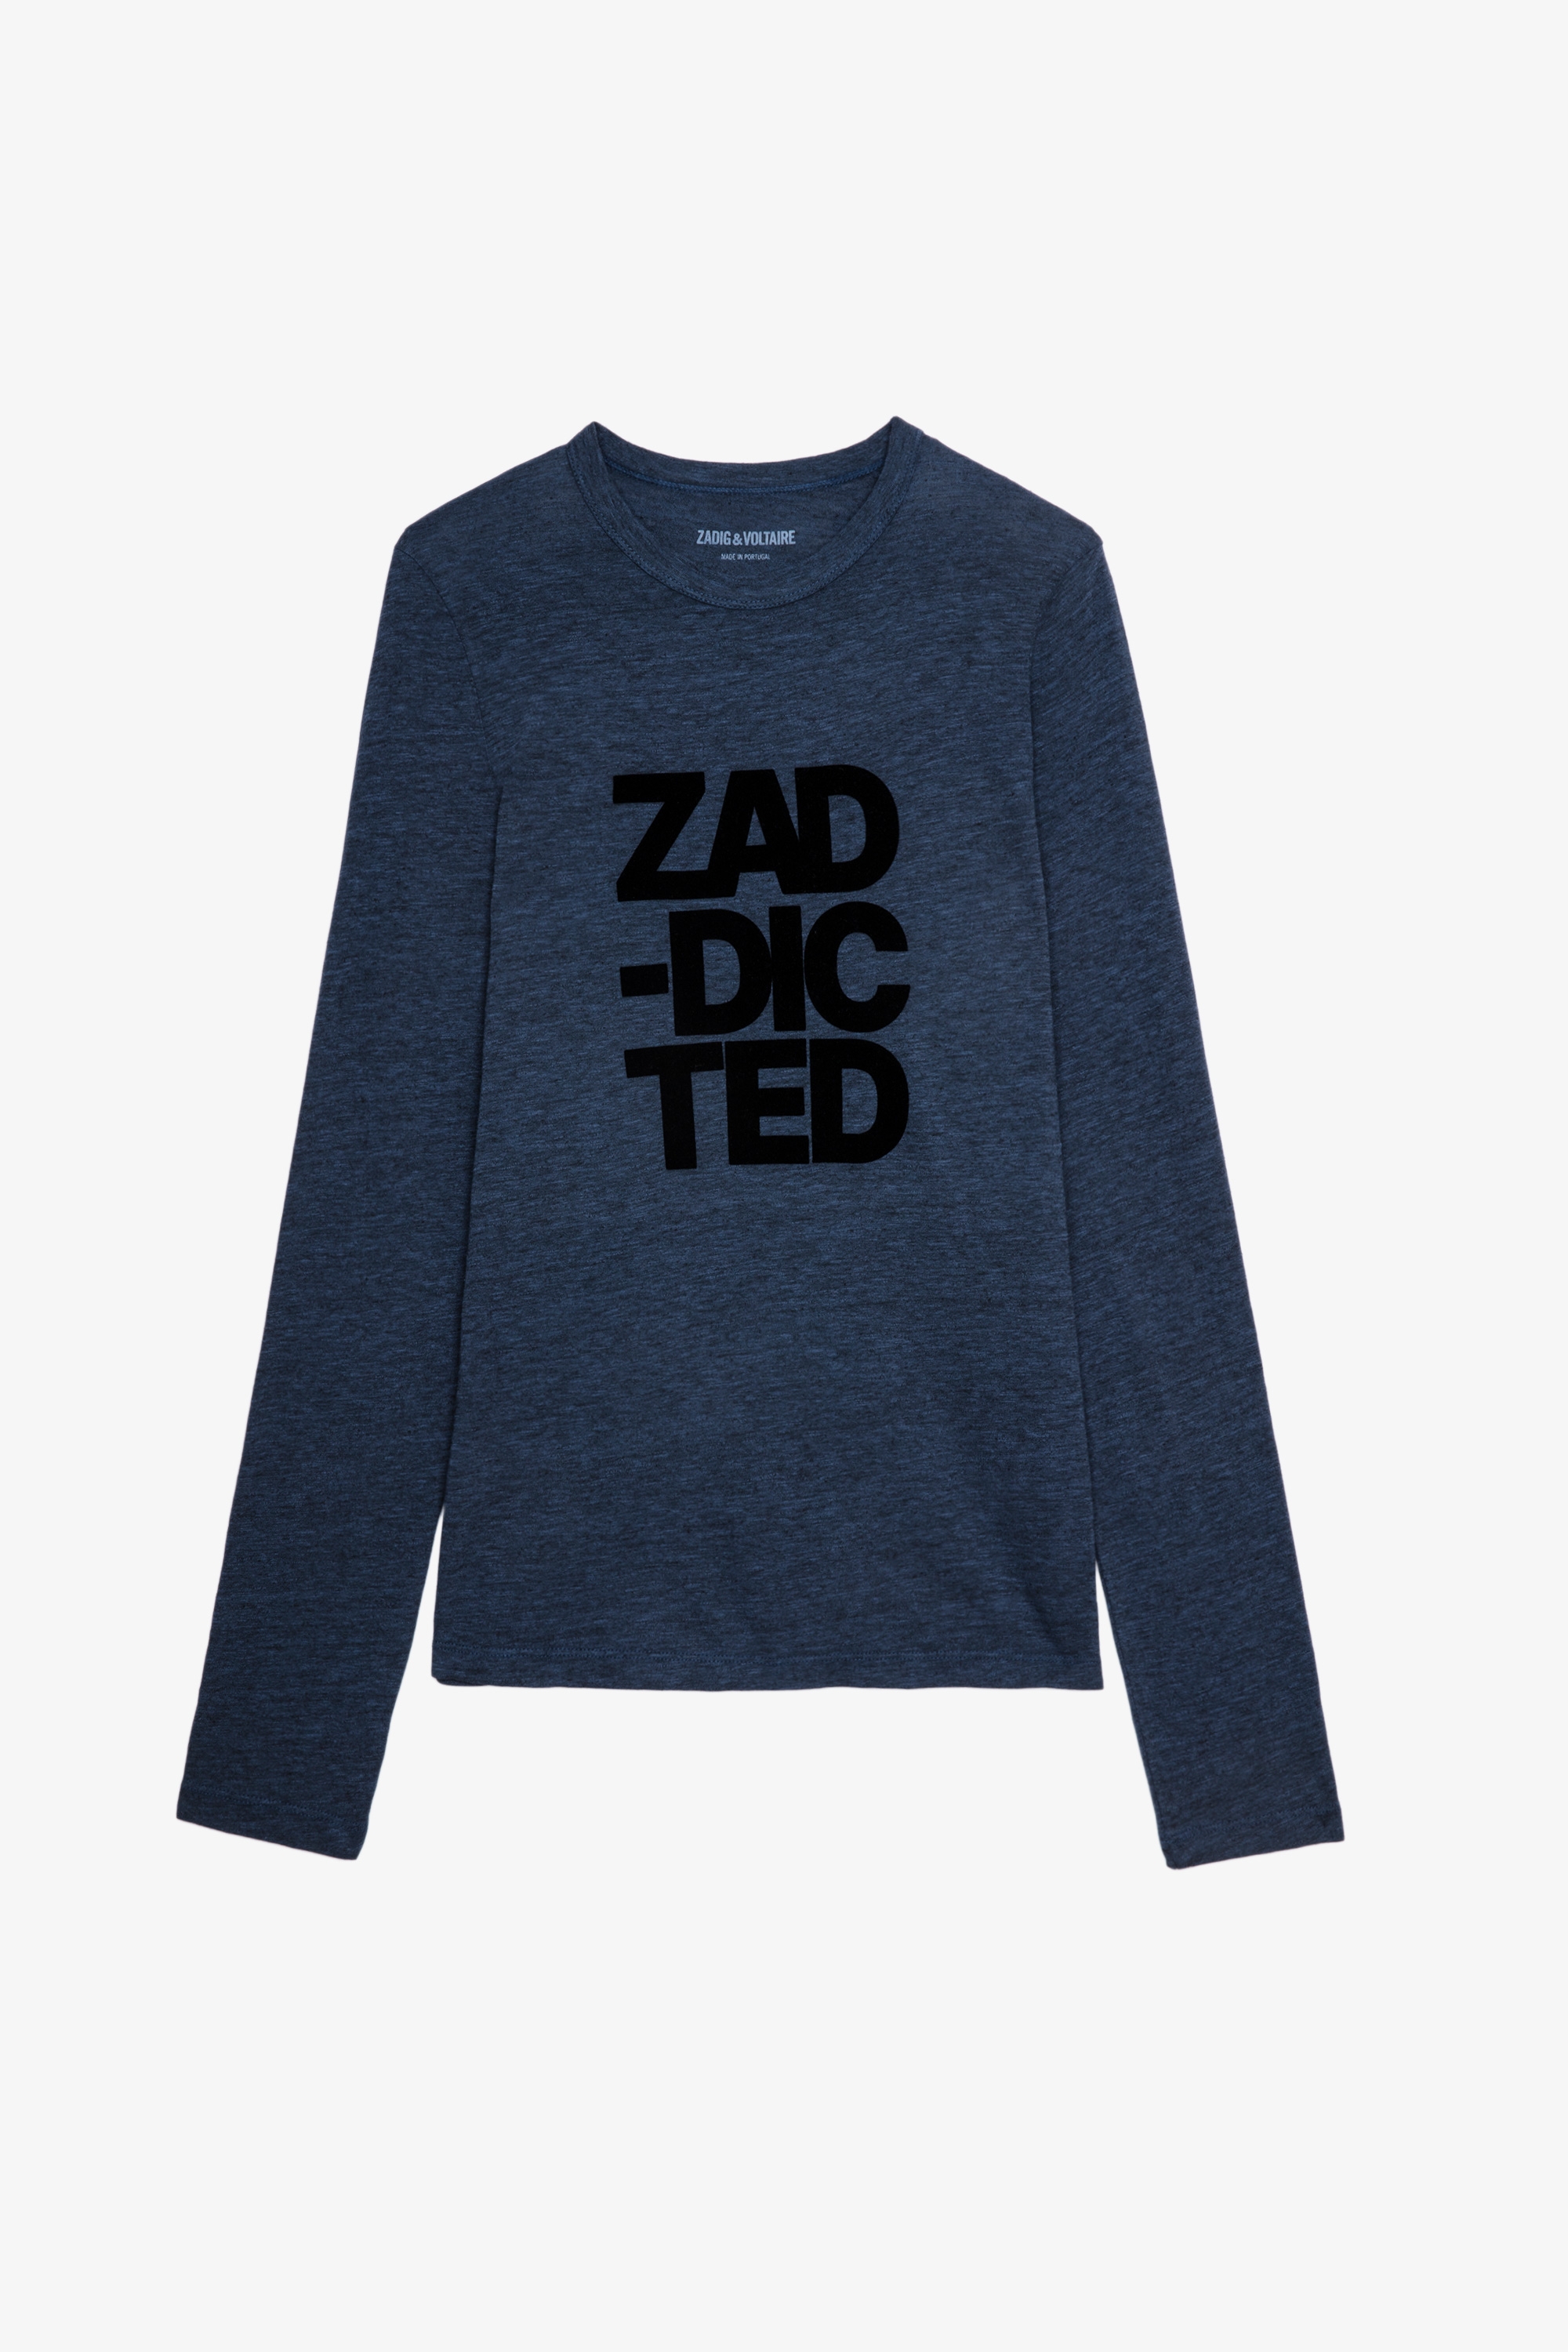 Willy Zaddicted T-Shirt